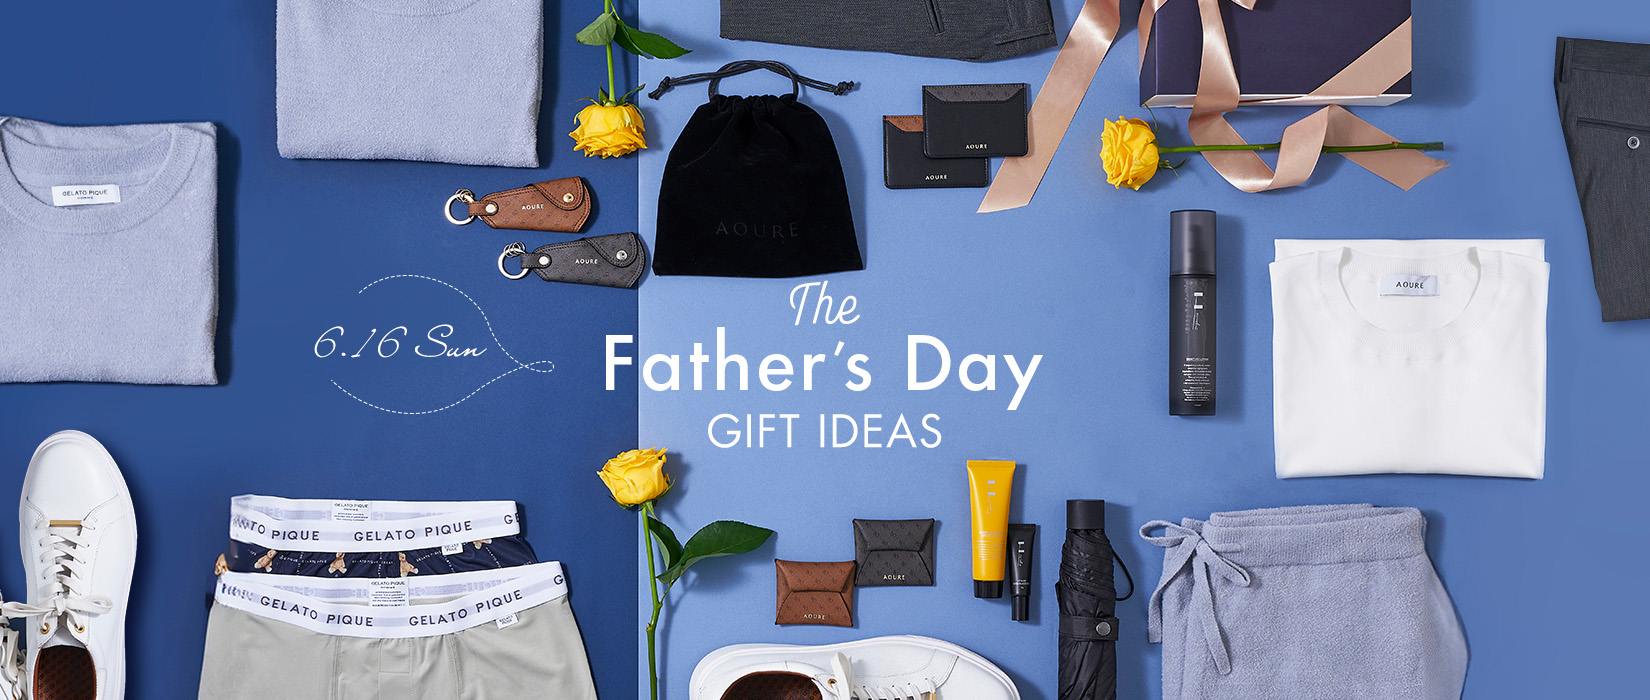 The Father’s Day Gift Ideas